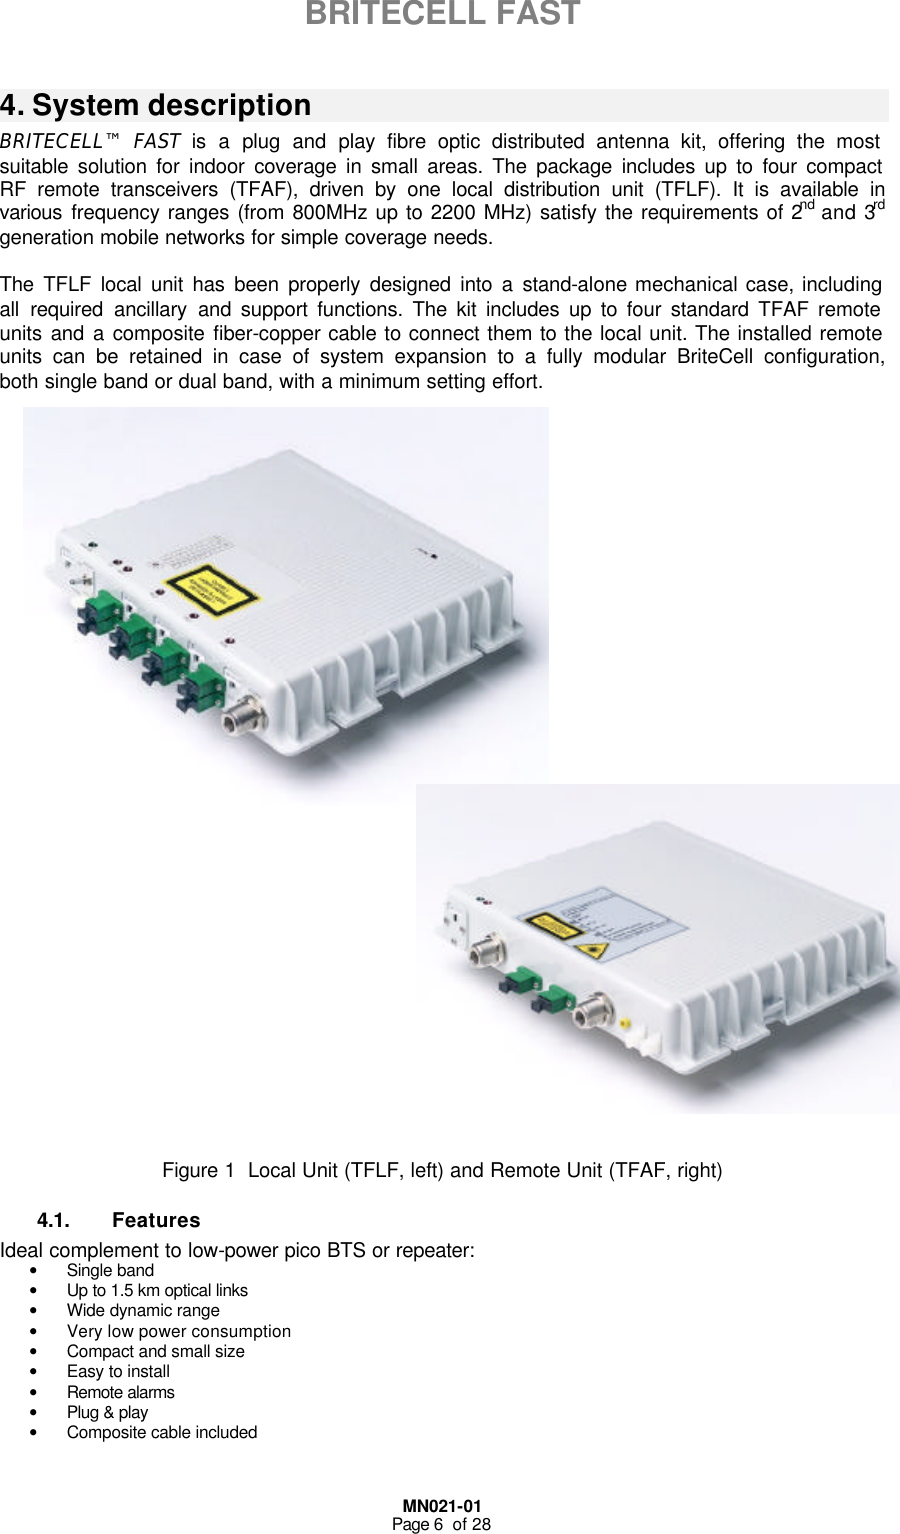  MN021-01 Page 6  of 28  BRITECELL FAST   4. System description BRITECELL™ FAST  is a plug and play fibre optic distributed antenna kit, offering the most suitable solution for indoor coverage in small areas. The package includes up to four compact RF remote transceivers (TFAF), driven by one local distribution unit (TFLF). It is available in various frequency ranges (from 800MHz up to 2200 MHz) satisfy the requirements of 2nd and 3rd generation mobile networks for simple coverage needs.  The TFLF local unit has been properly designed into a stand-alone mechanical case, including all required ancillary and support functions. The kit includes up to four standard TFAF remote units and a composite fiber-copper cable to connect them to the local unit. The installed remote units can be retained in case of system expansion to a fully modular BriteCell configuration, both single band or dual band, with a minimum setting effort.                                 Figure 1  Local Unit (TFLF, left) and Remote Unit (TFAF, right) 4.1. Features Ideal complement to low-power pico BTS or repeater: • Single band • Up to 1.5 km optical links • Wide dynamic range • Very low power consumption • Compact and small size • Easy to install • Remote alarms  • Plug &amp; play • Composite cable included 